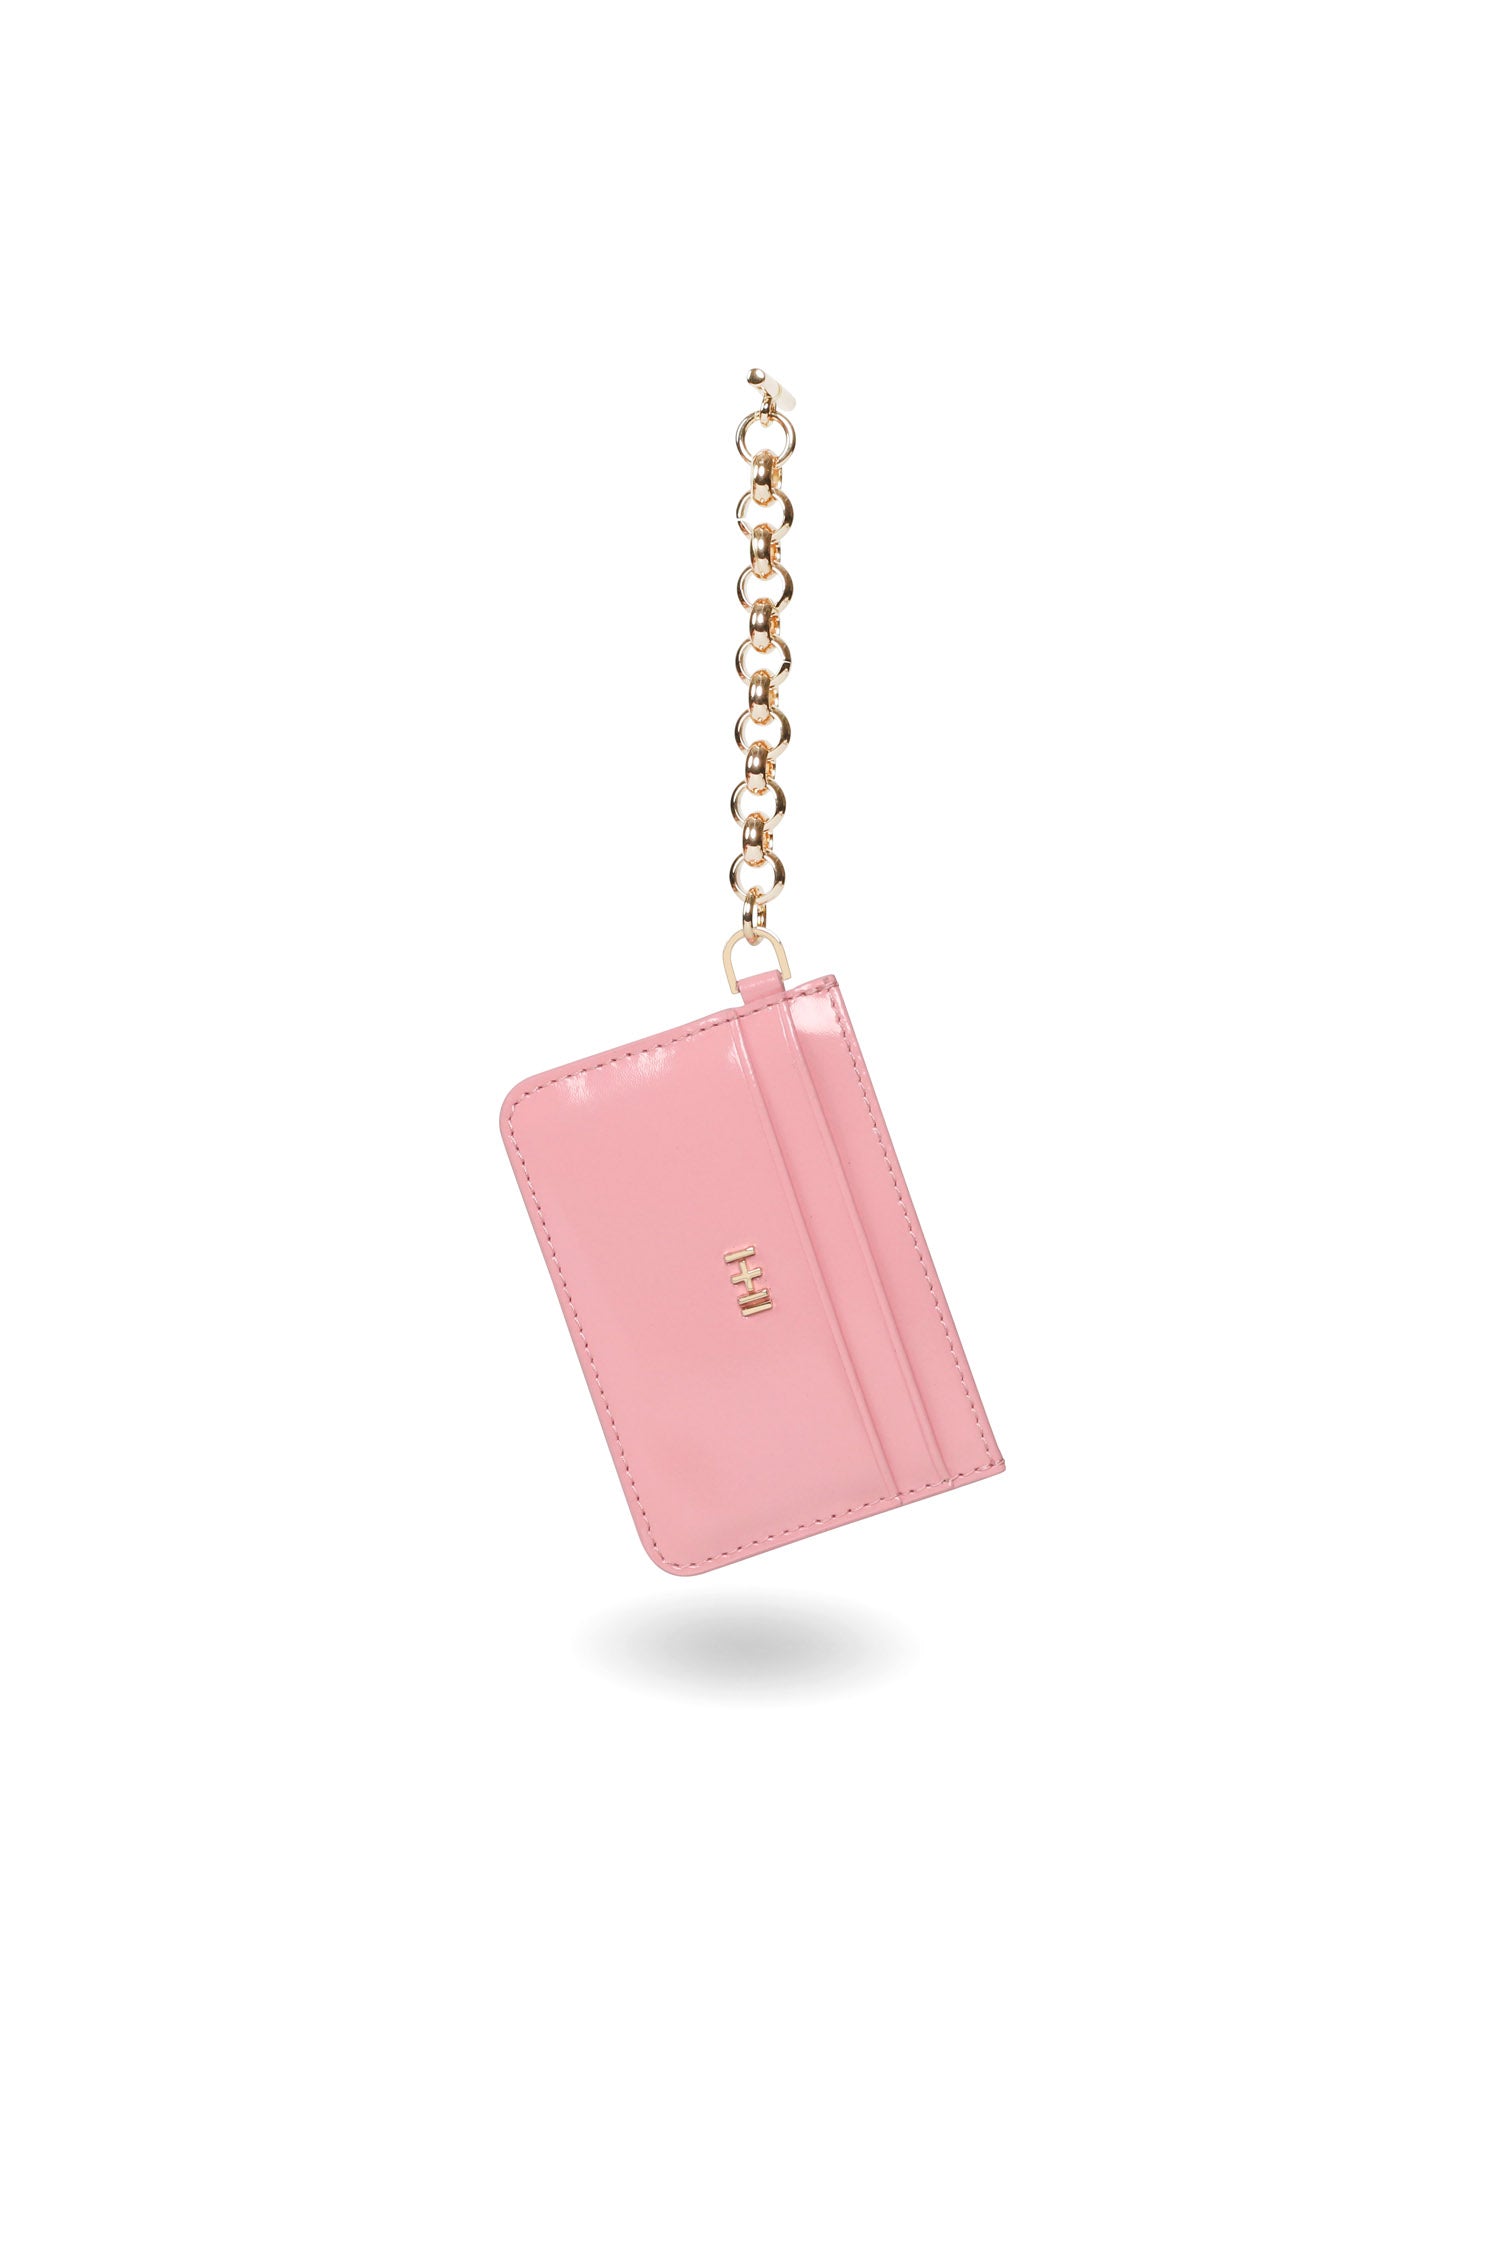 The Yumi Card Holder Candy Pink